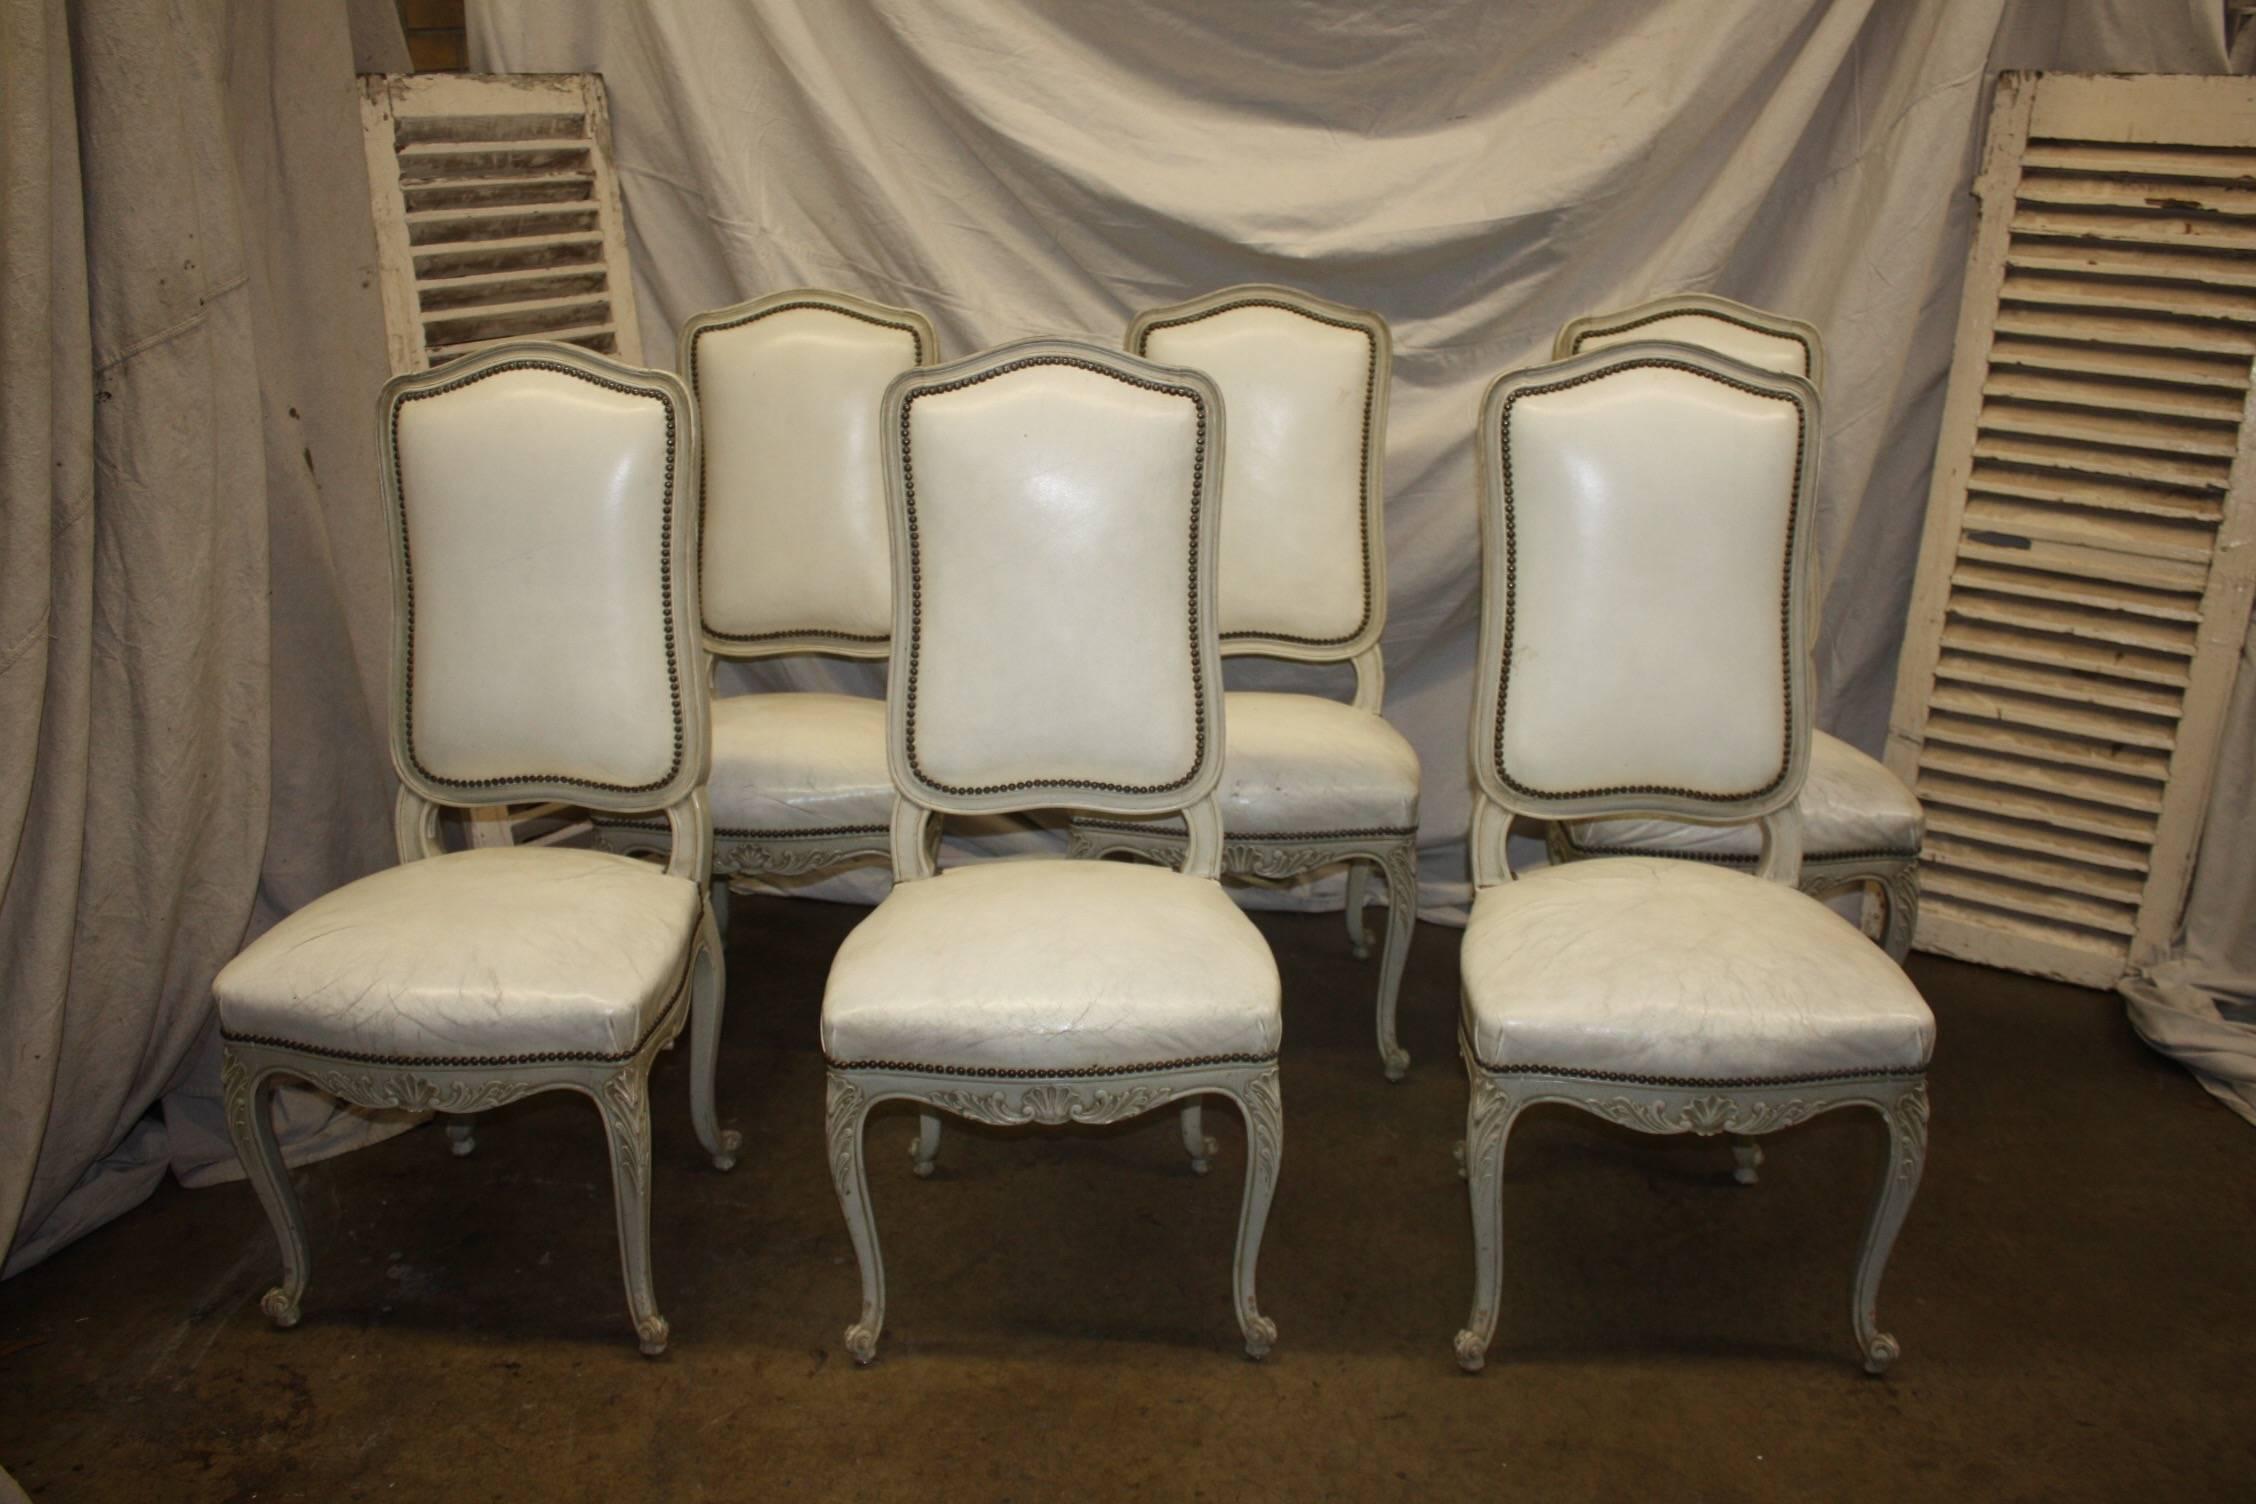 Exquisite 19th Century Italian Painted Chairs 2